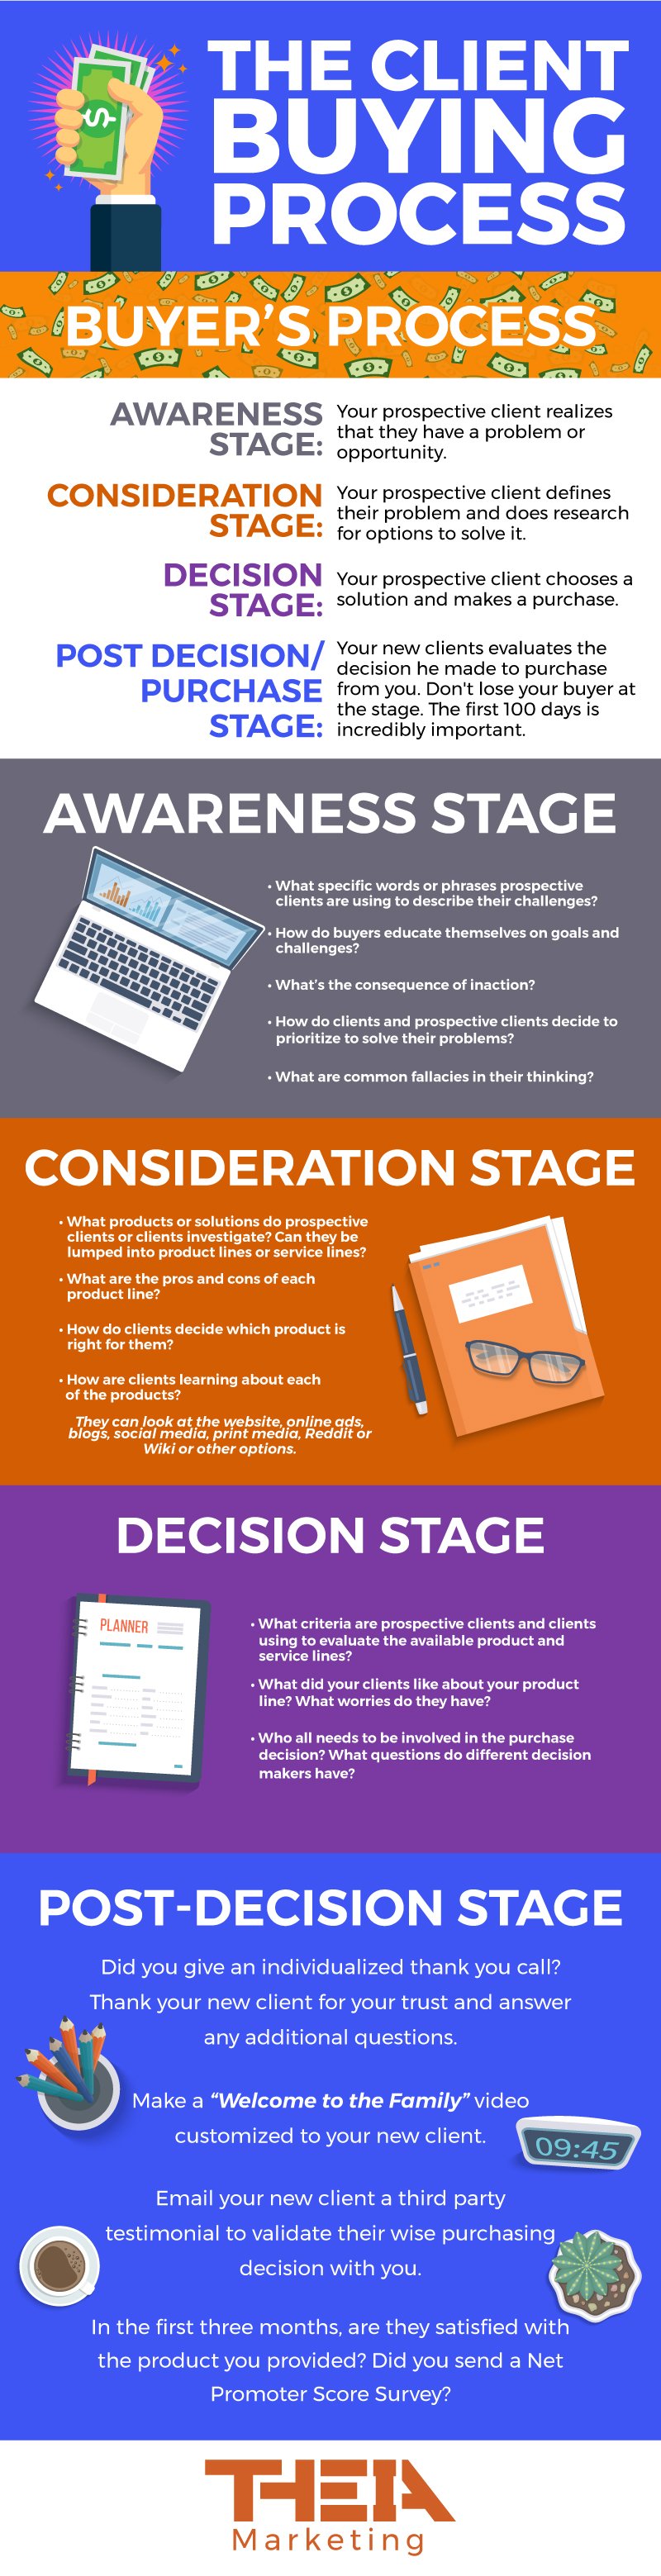 555928_Client Buying Process Infographic_100919